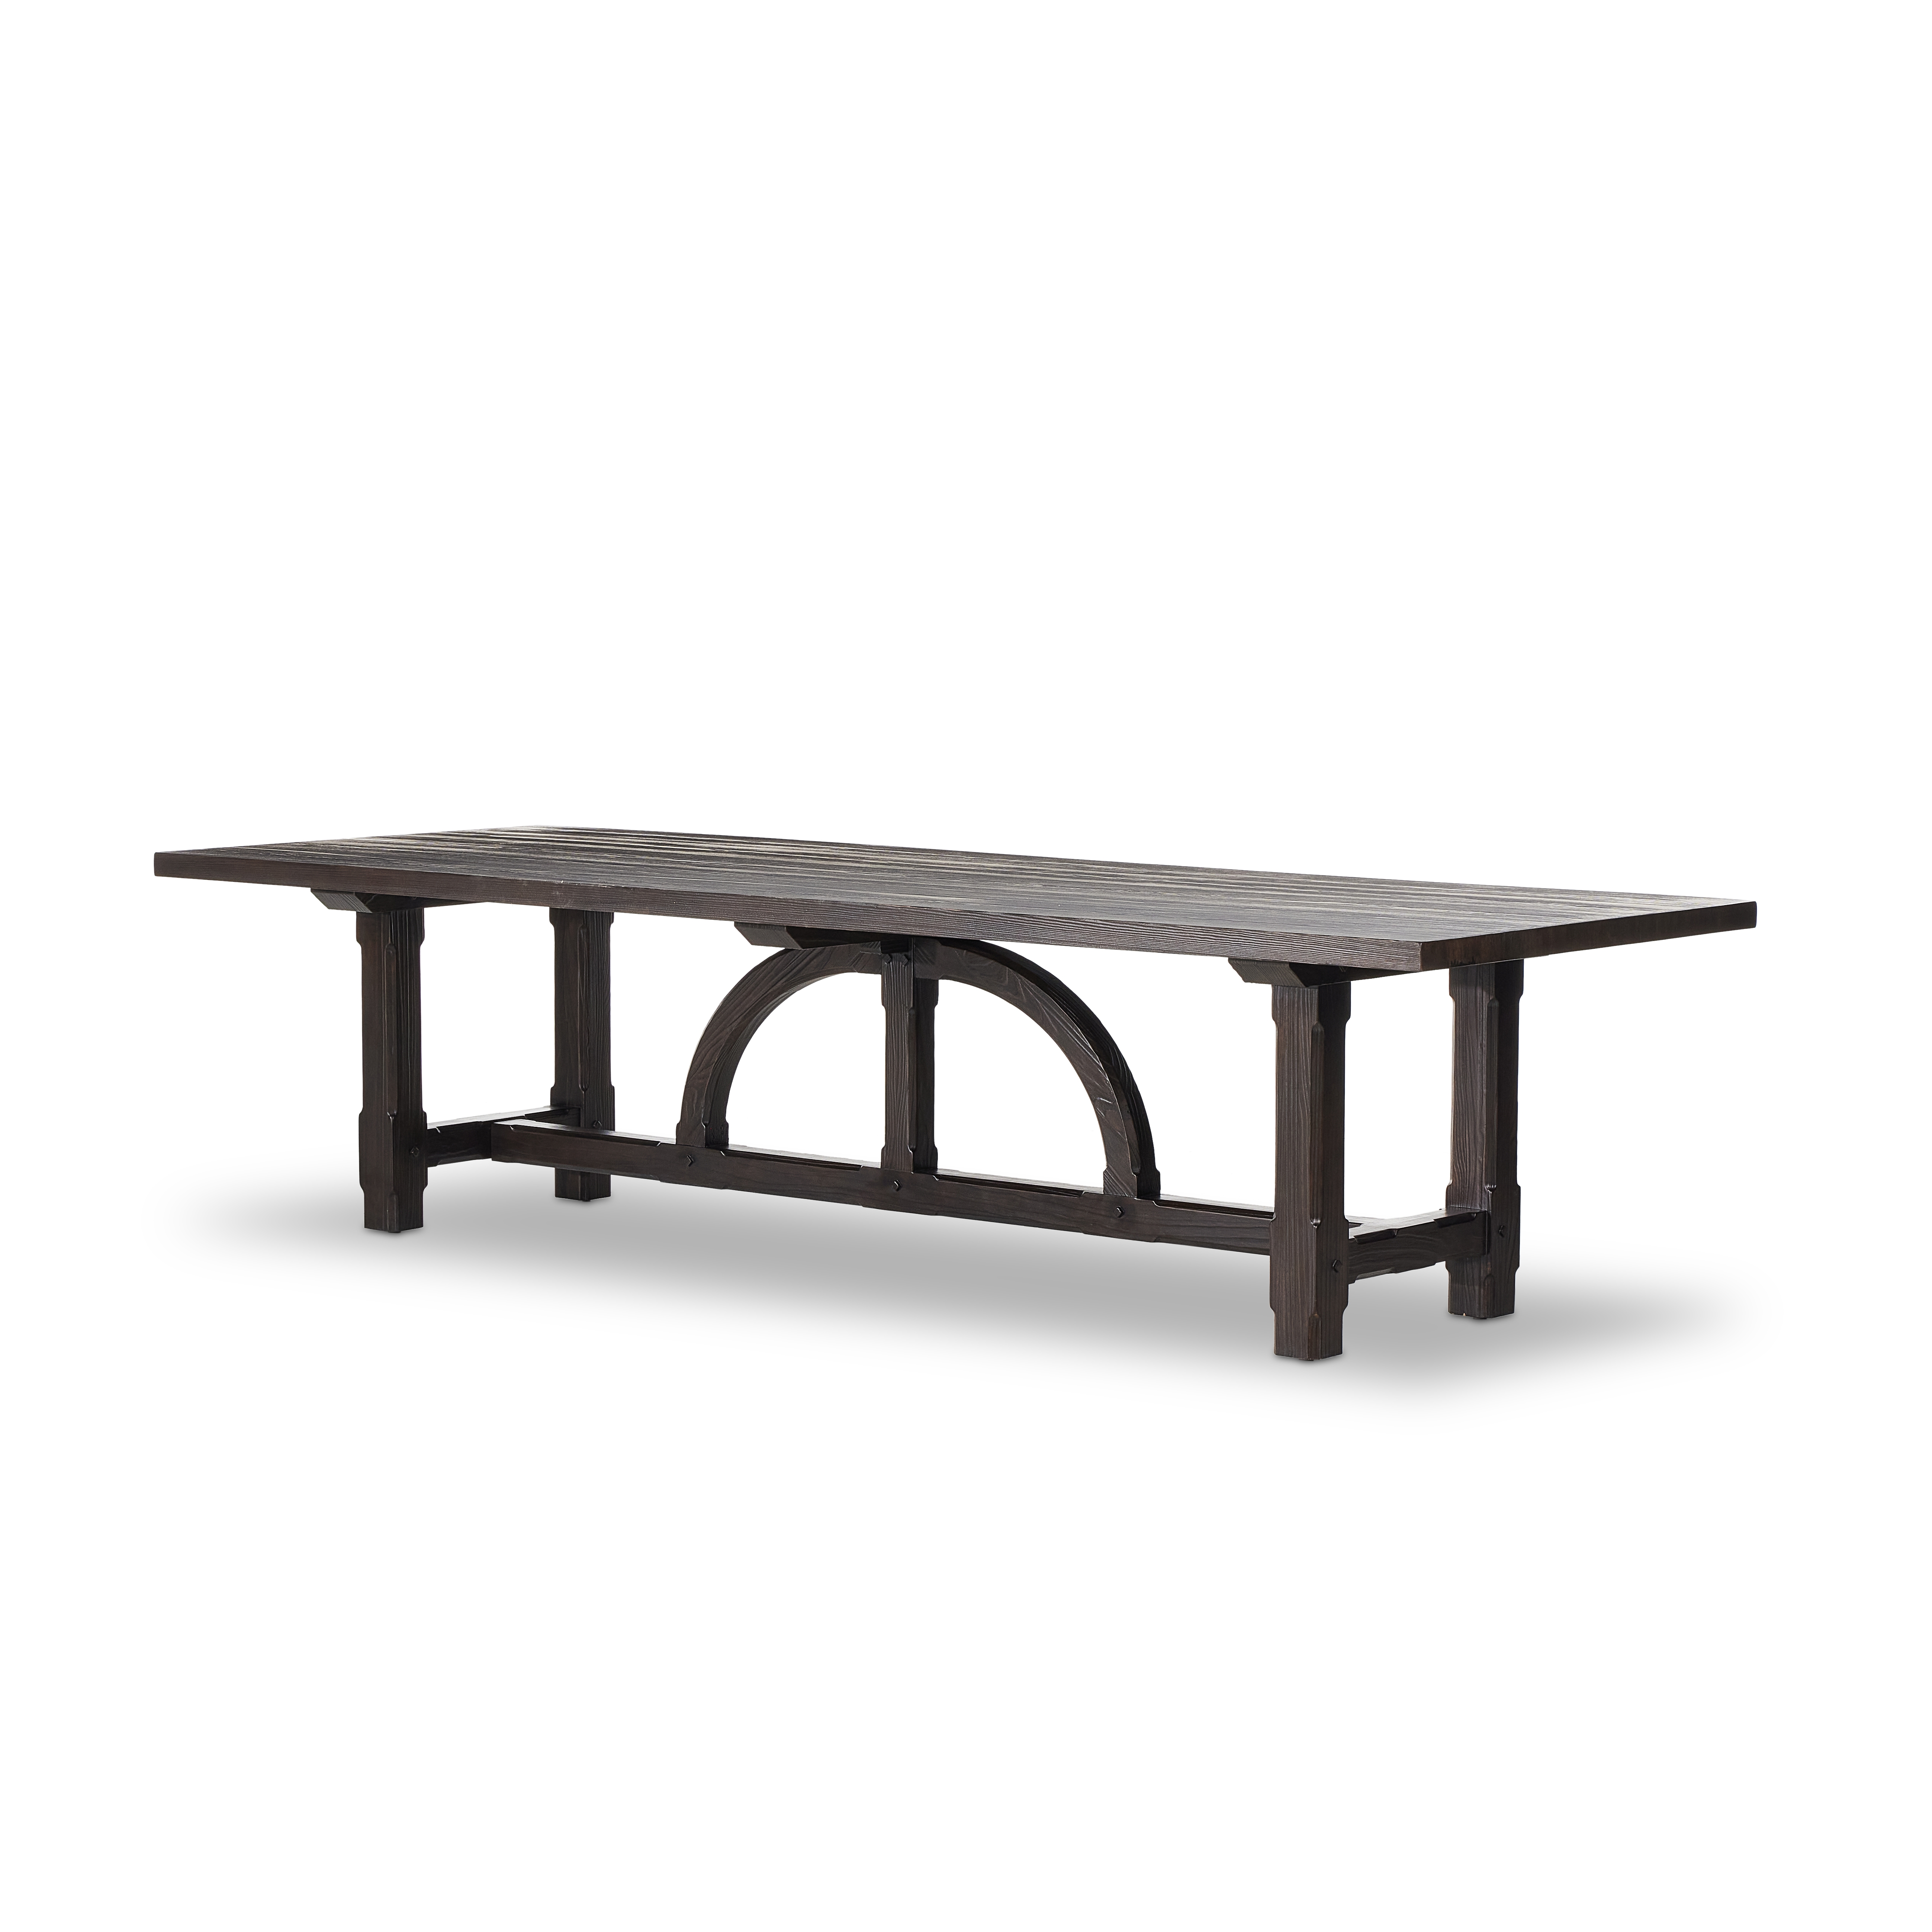 The Arch Dining Table-Medium Brown Fir - Image 0